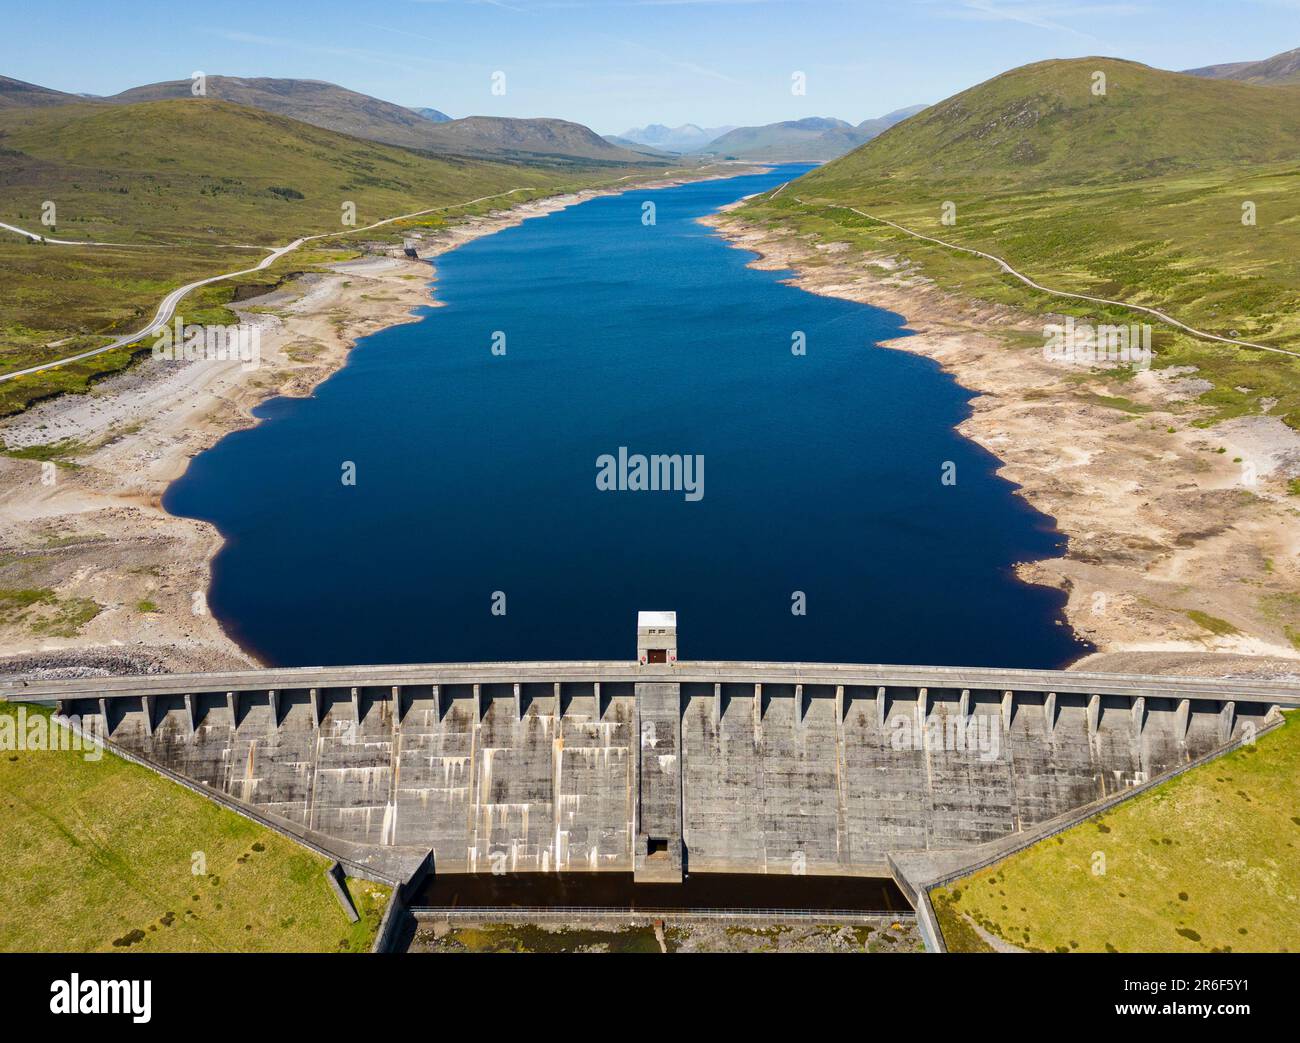 Garve, Scotland, UK. 9th June 2023. An aerial view of Glascarnoch Dam south of Ullapool. Prolonged drought conditions in the Scottish Highlands have led to low water levels in Glascarnoch reservoir near Garve.  Authorities have warned of possible water restrictions if the dry weather continues. Iain Masterton/Alamy Live News Stock Photo